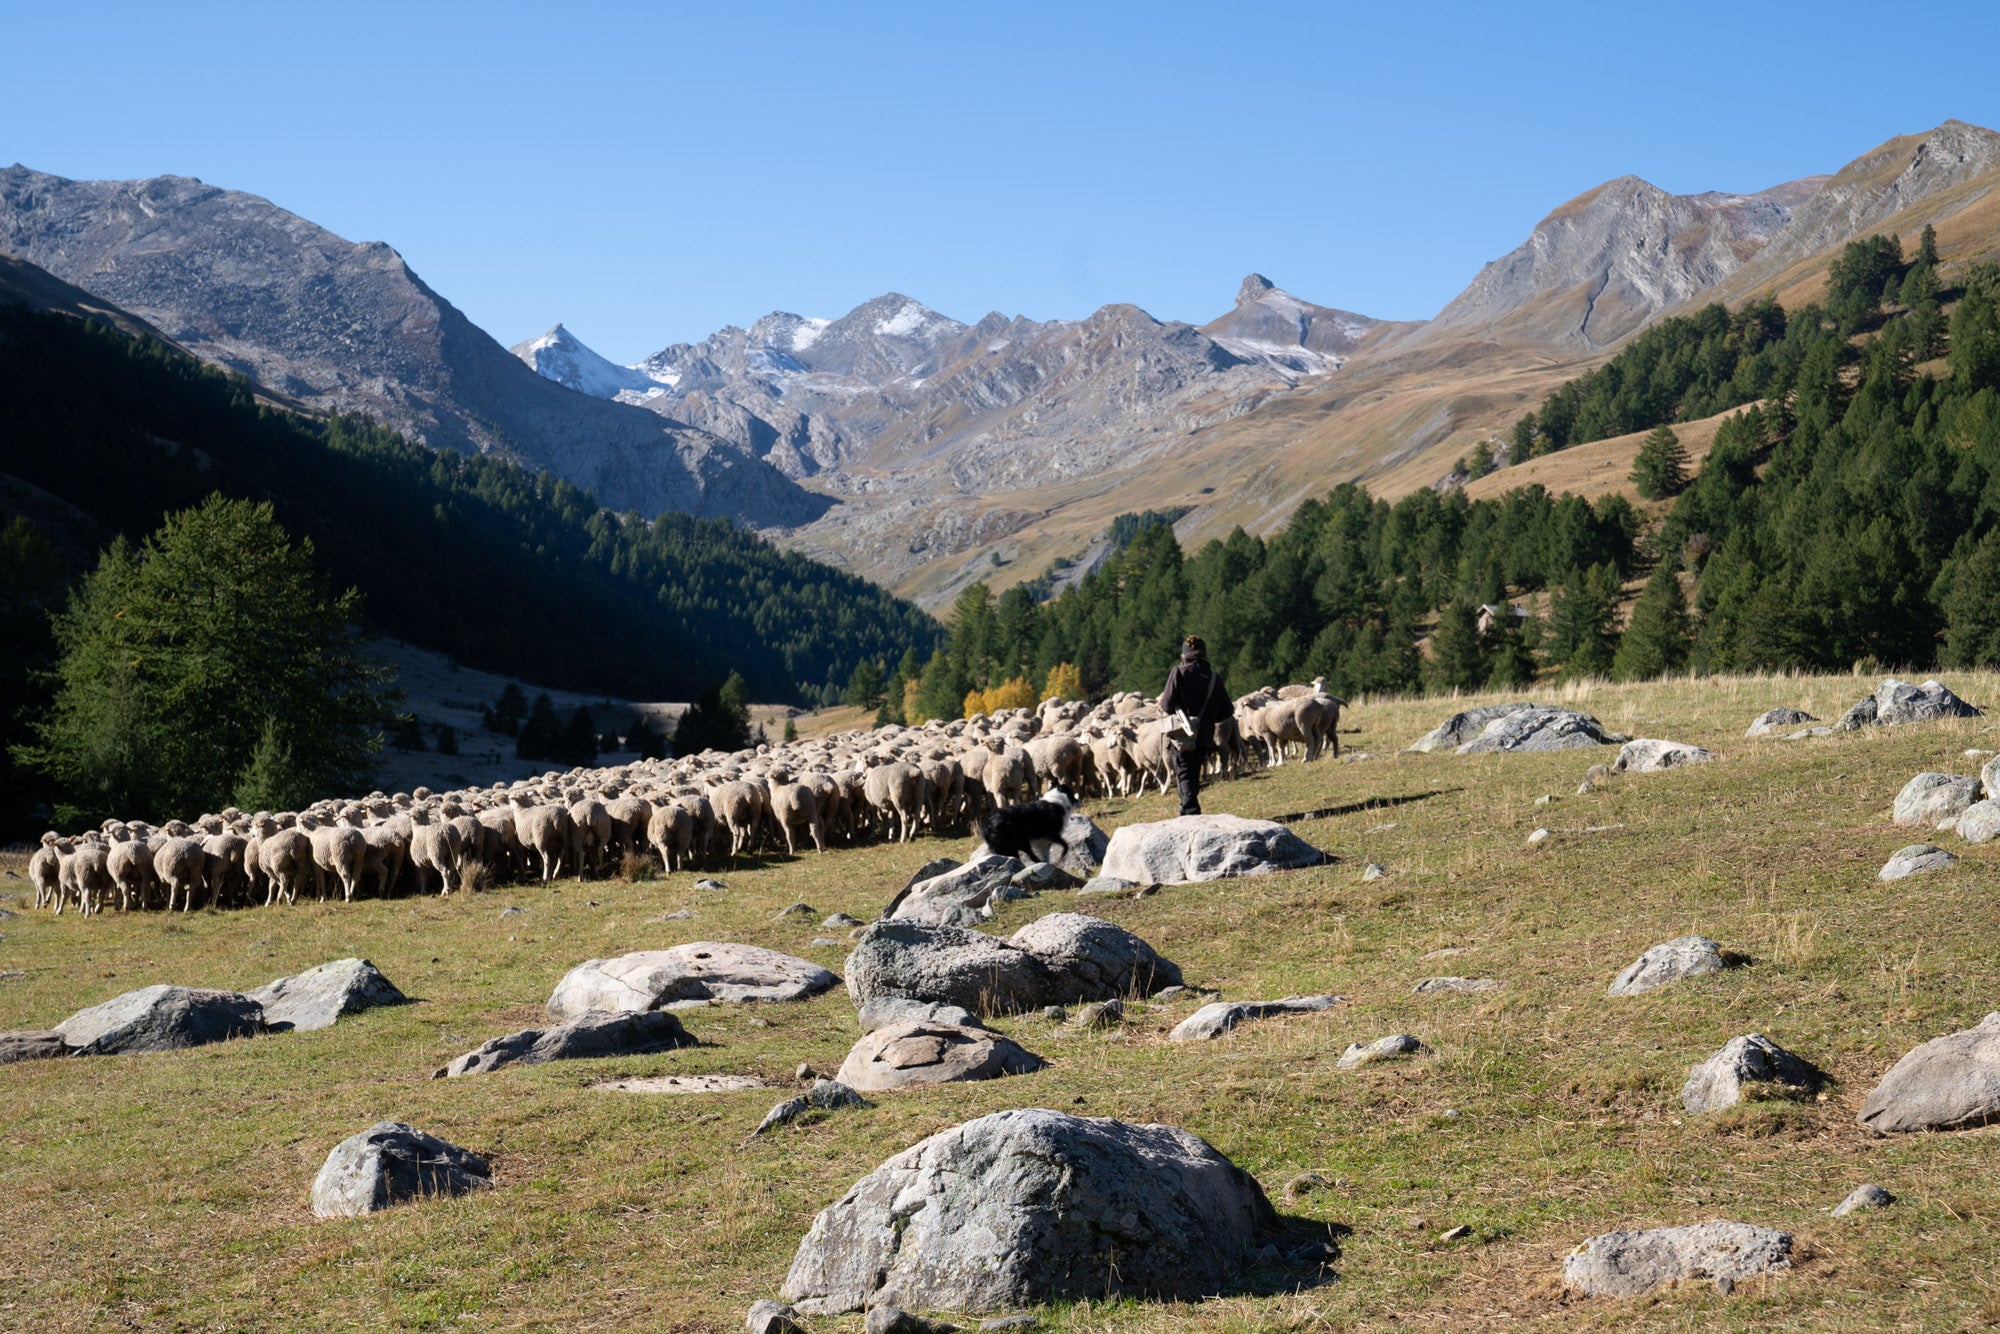 Shepherd with flock in the meadow with French alps in background